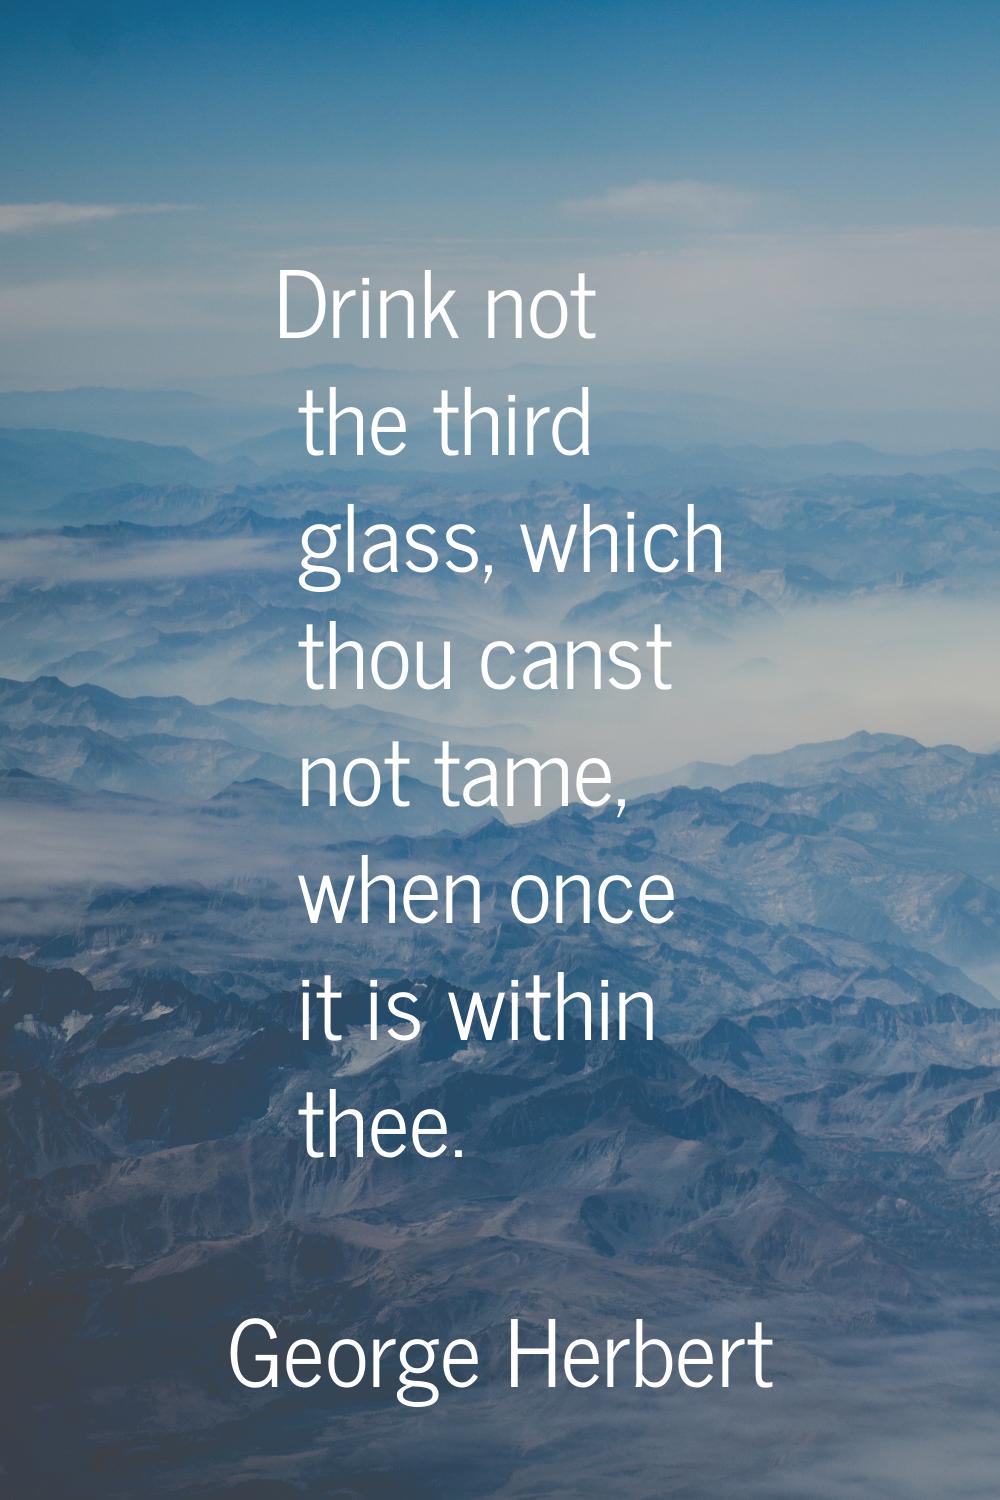 Drink not the third glass, which thou canst not tame, when once it is within thee.